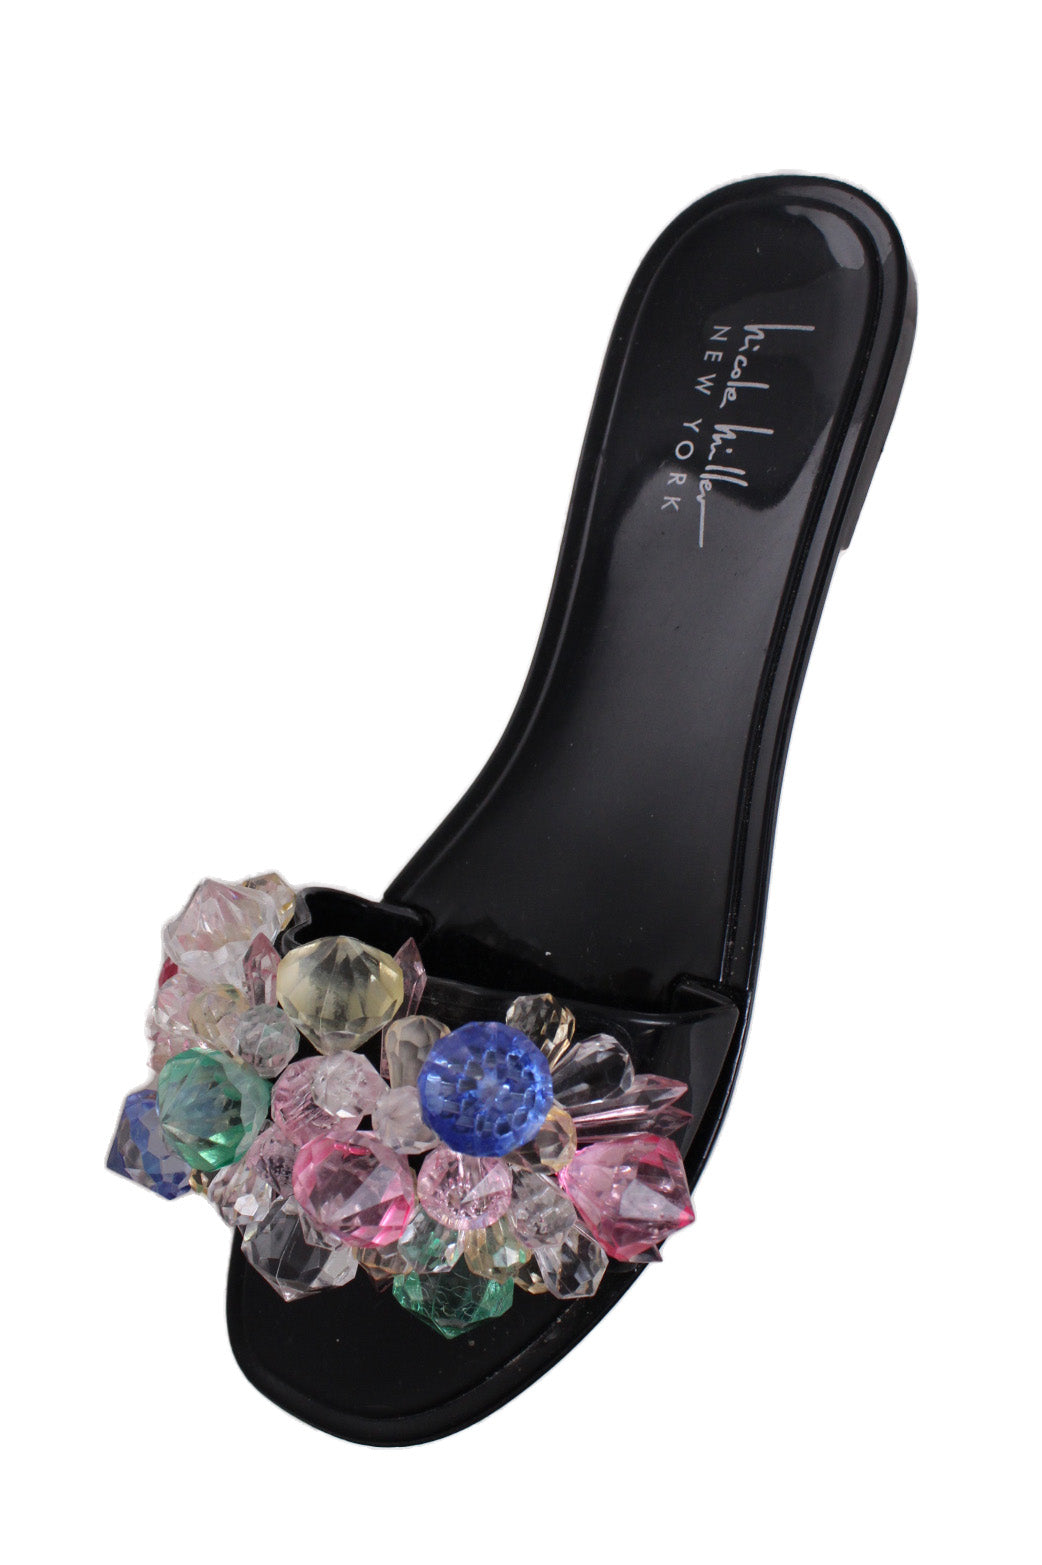 above three-quarter angle nicole miller black sandals featuring bead embellishment and squared toe.